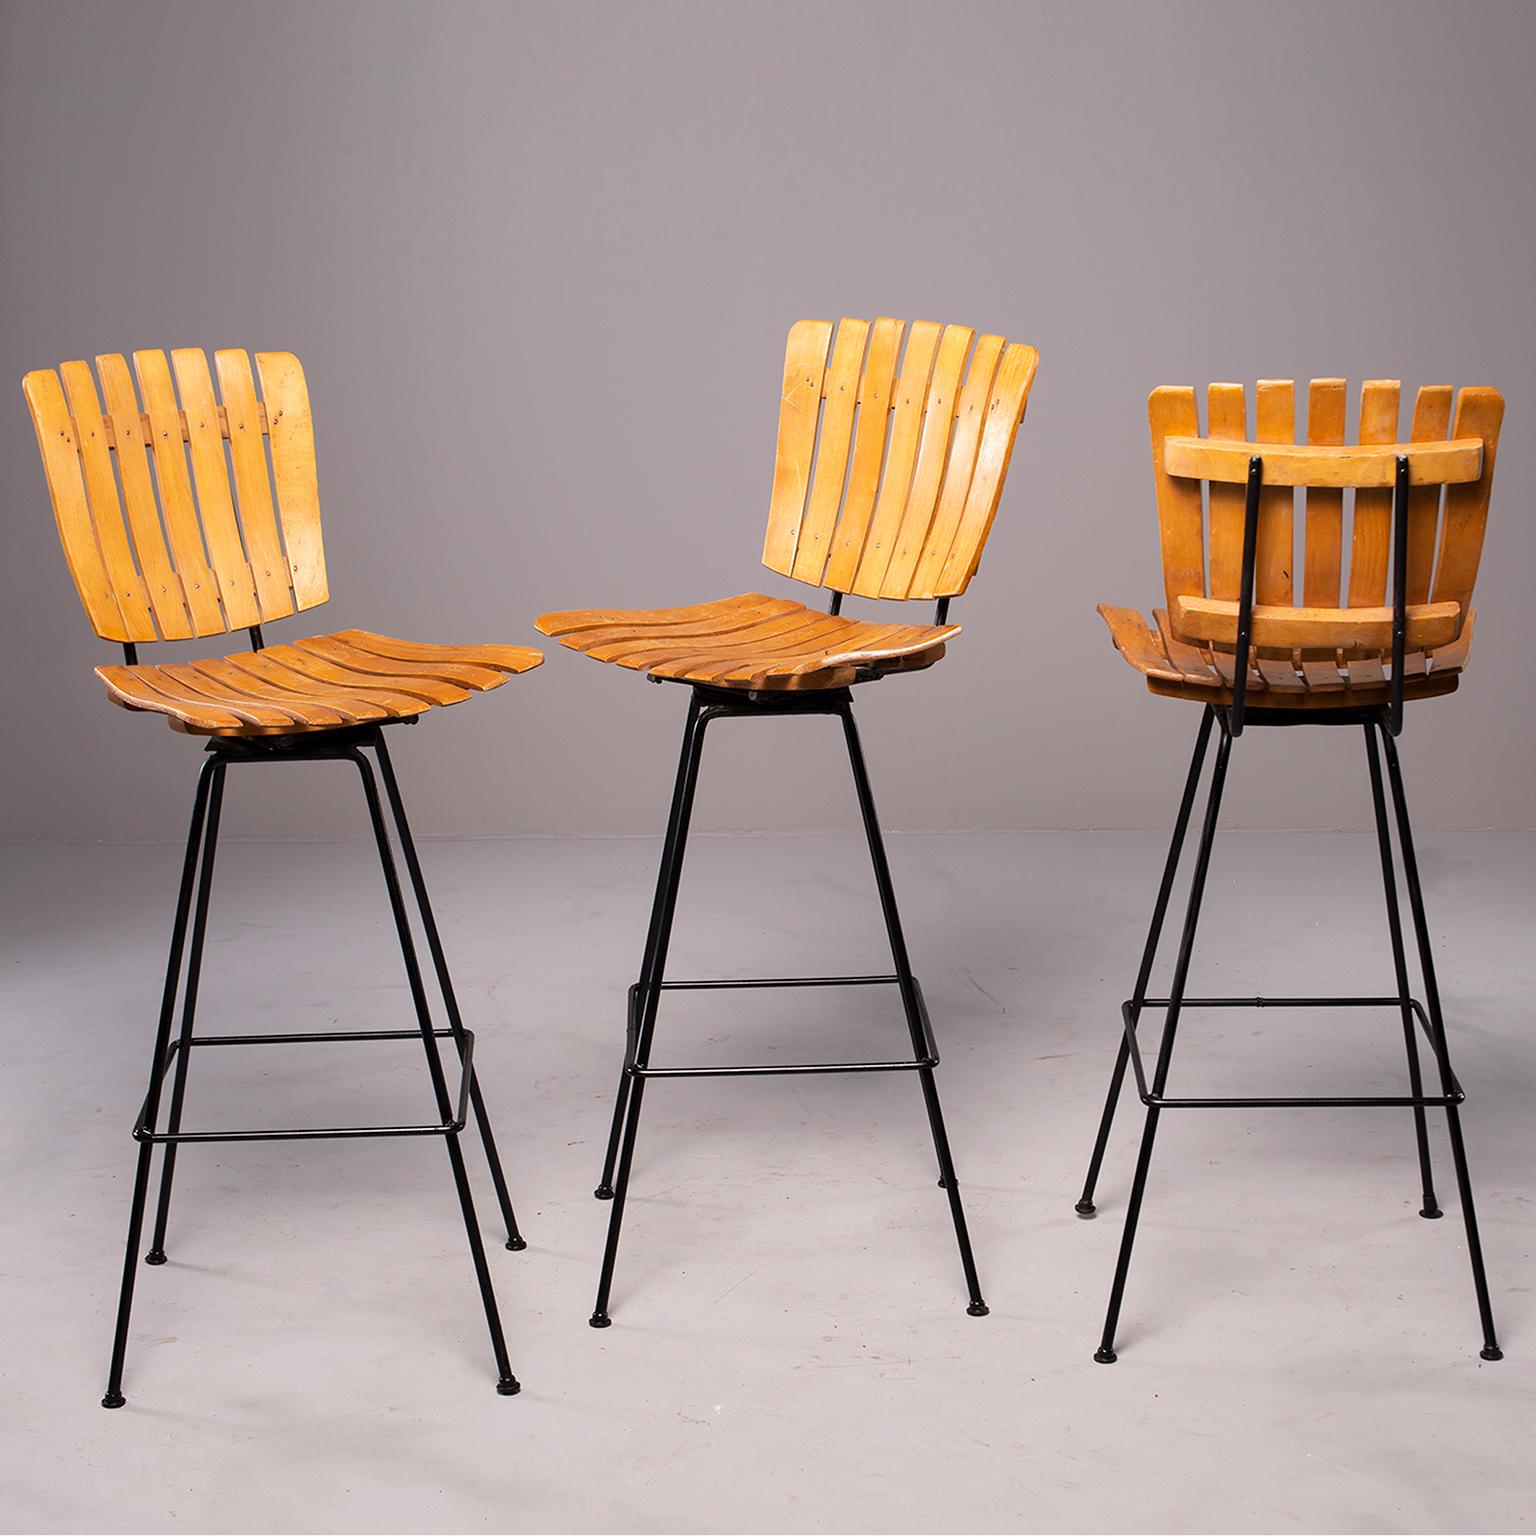 Trio of circa 1960s swiveling bar height stools. Designed by Arthur Umanoff, these stools have slender black iron bases and foot rests. Seats are beech slat wood. Seats are 29